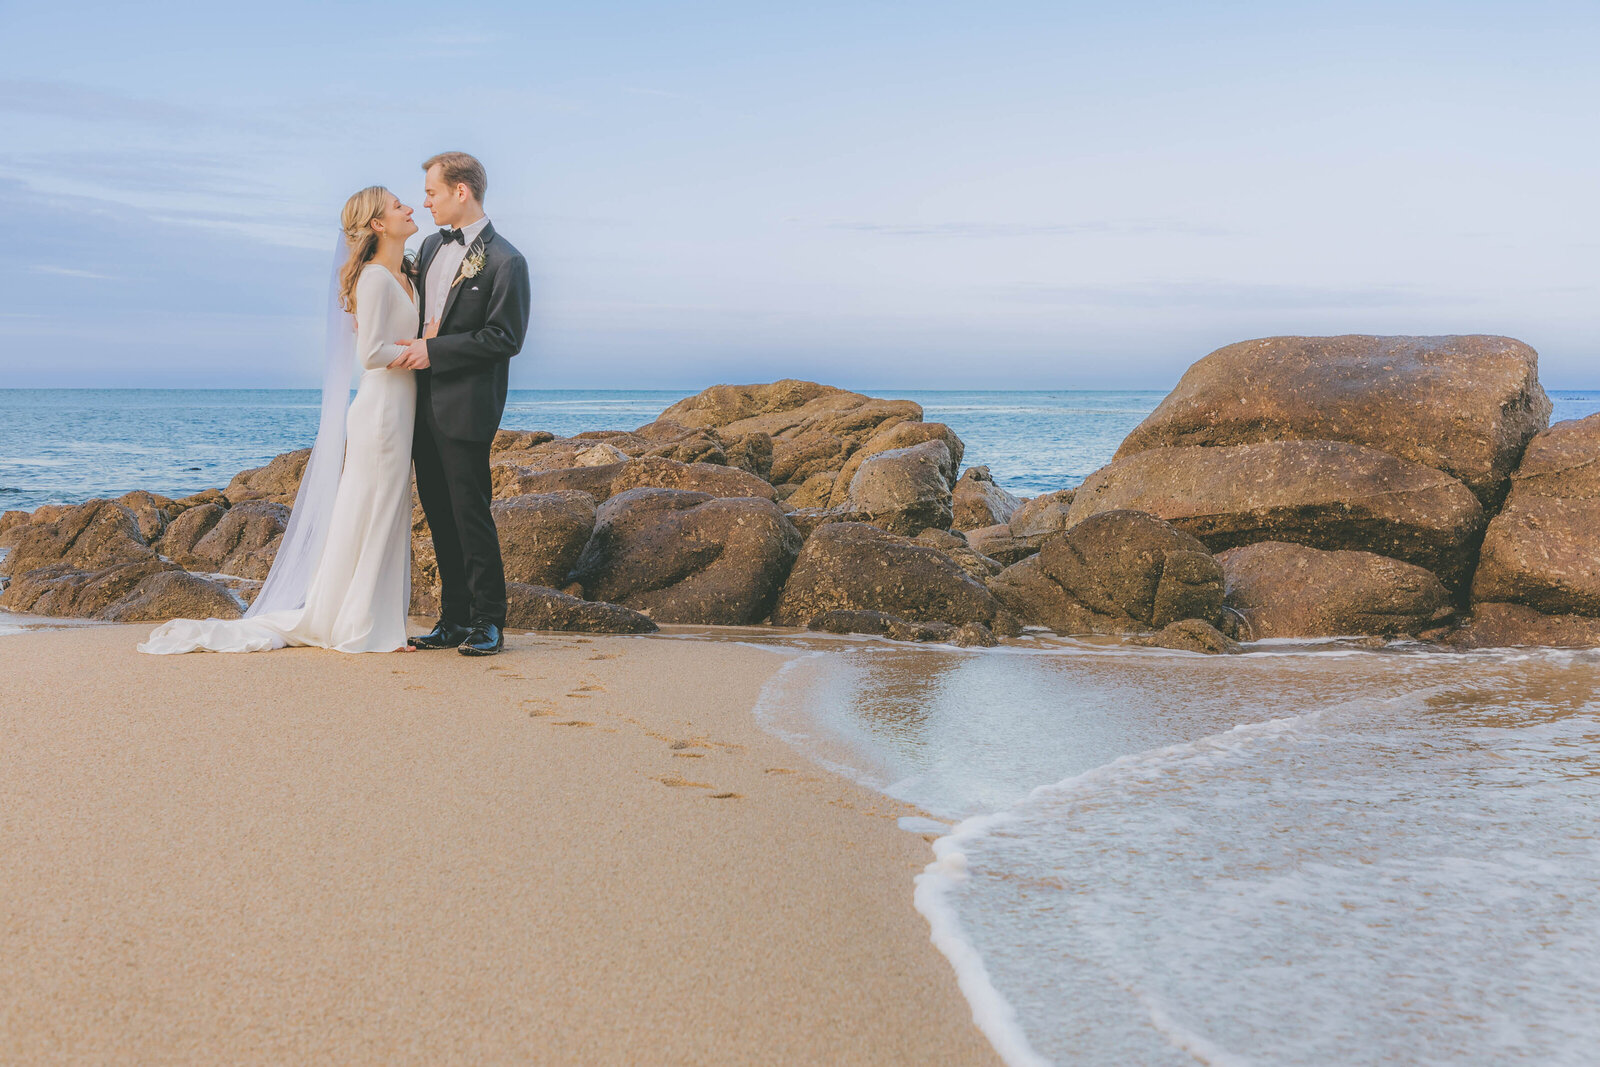 A bride and groom are towards the left of the photo as the ocean's waves flow towards the right during their beach wedding.